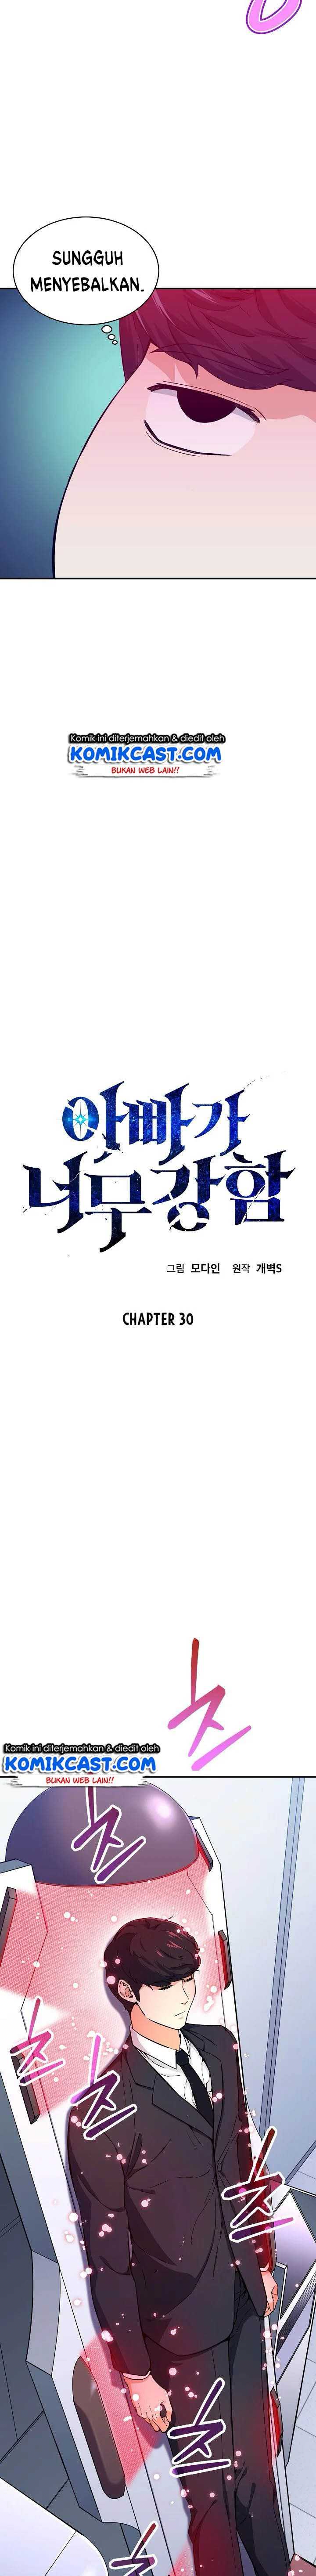 My Dad Is Too Strong Chapter 30